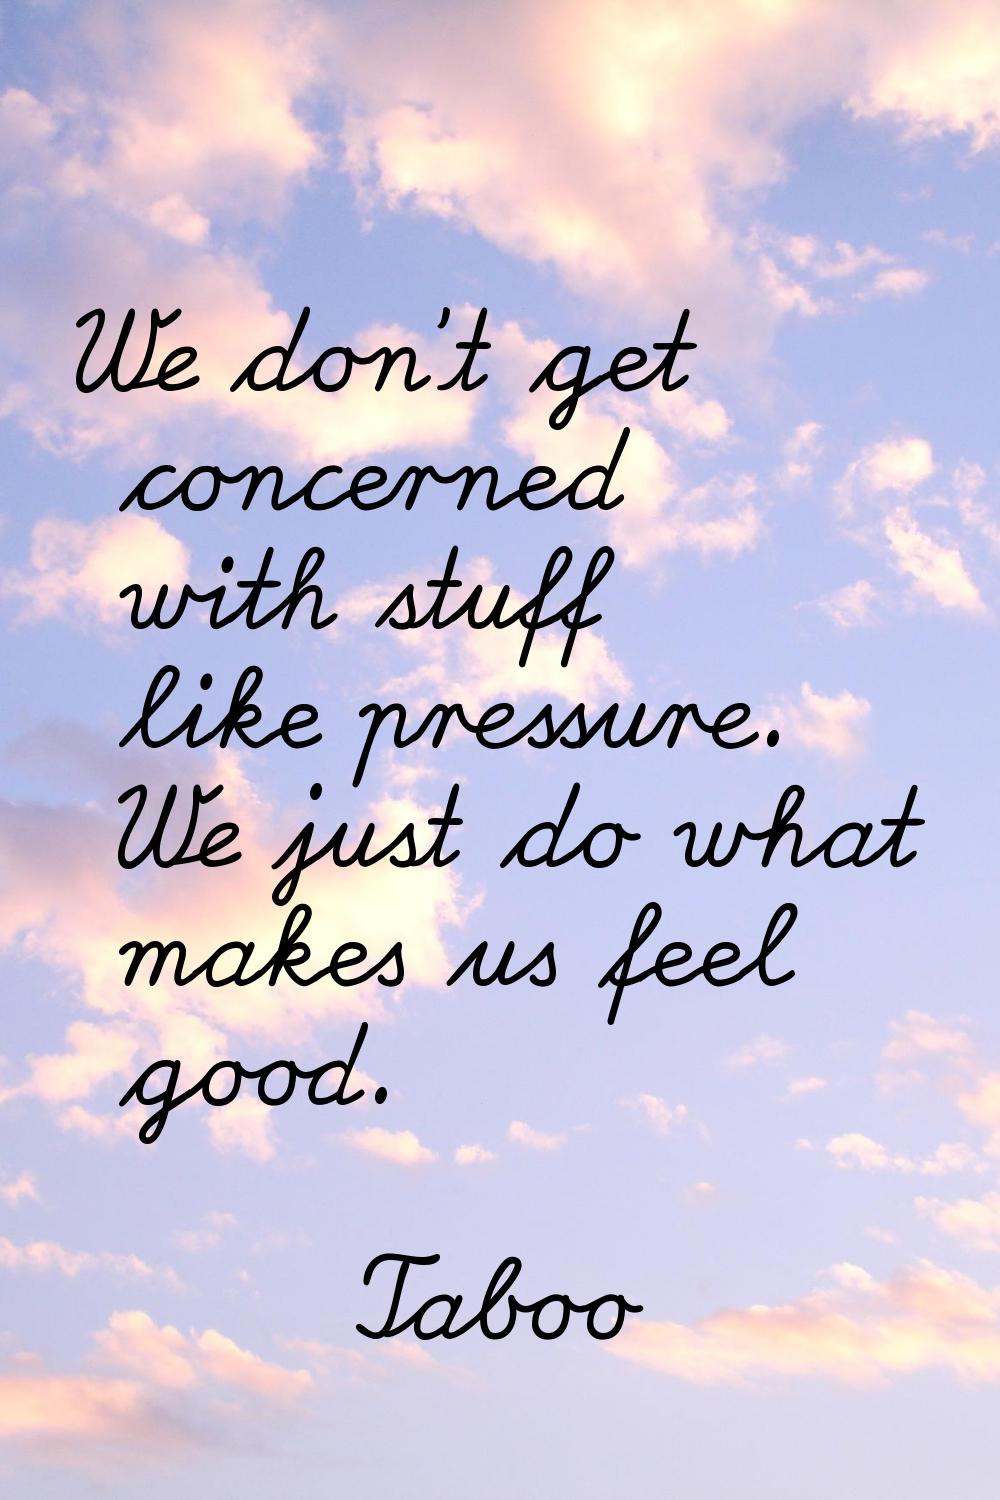 We don't get concerned with stuff like pressure. We just do what makes us feel good.